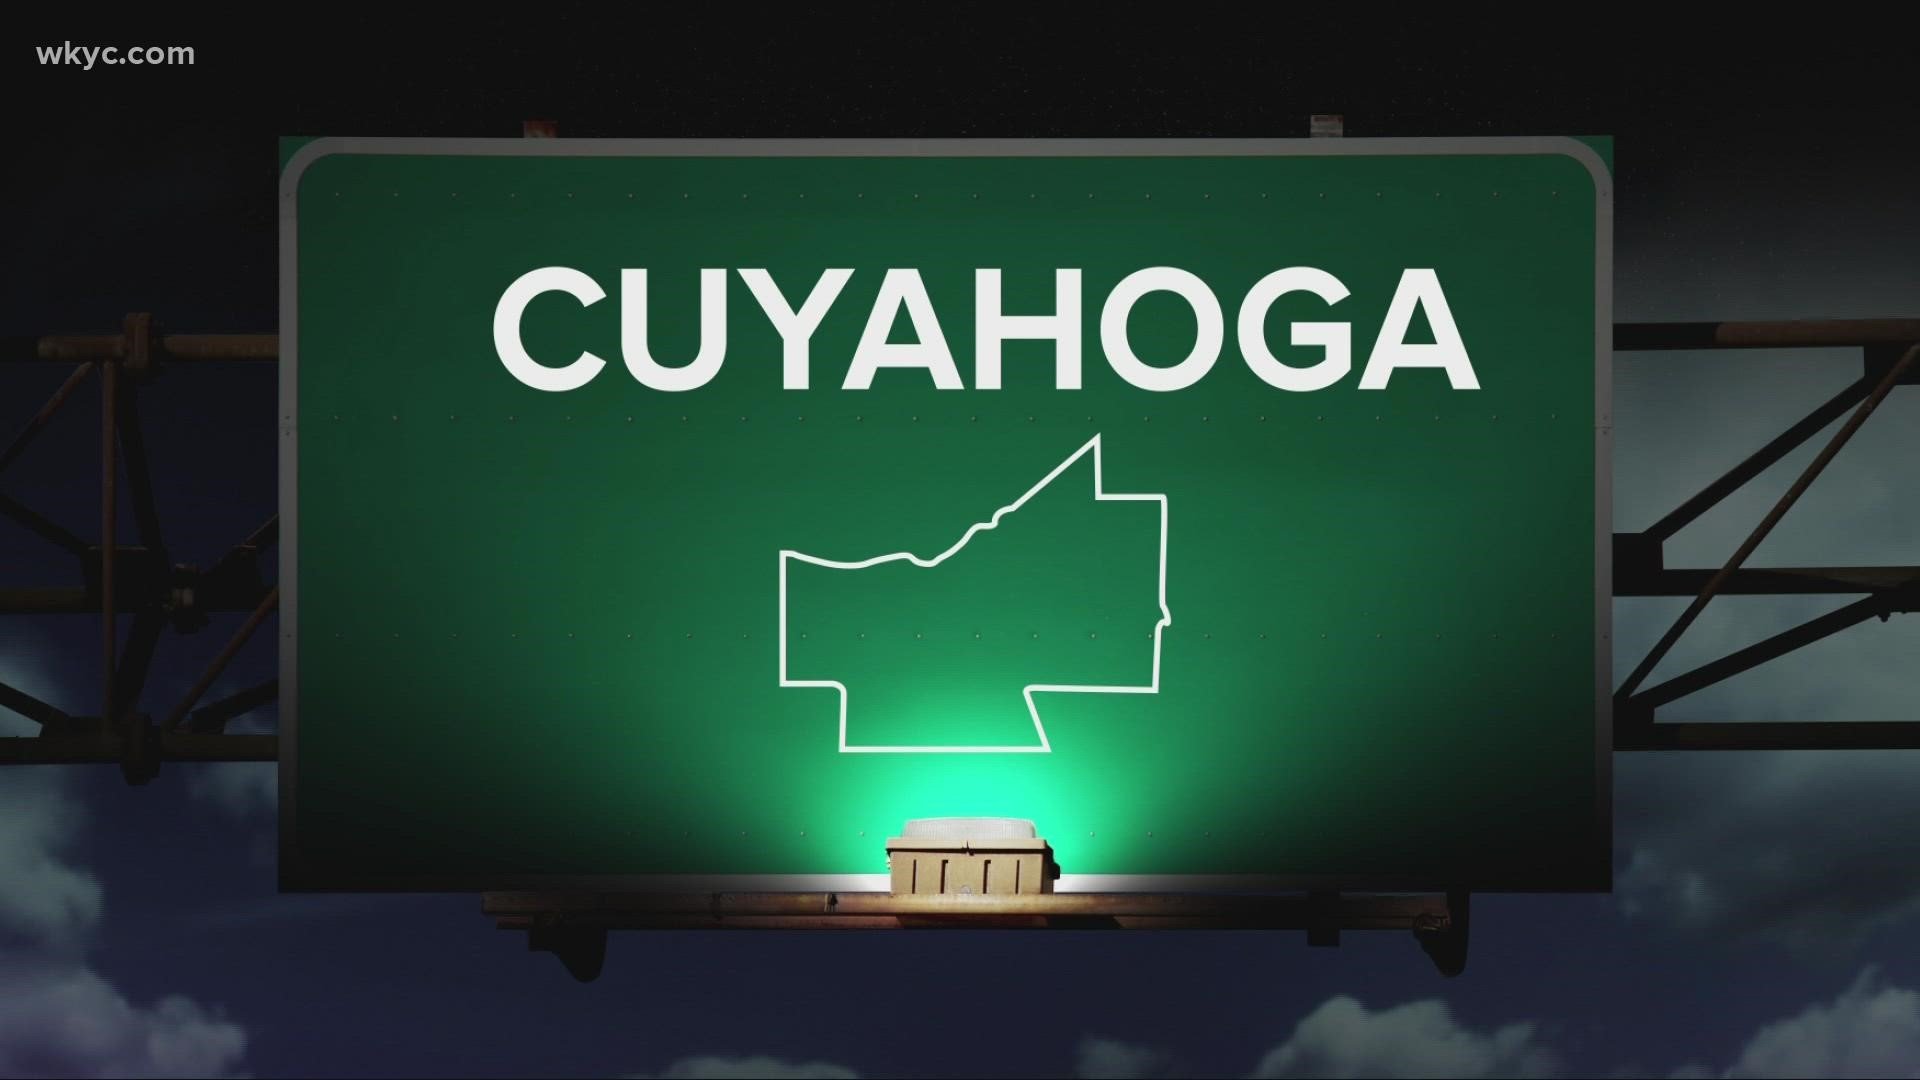 There has been a long running debate on how to pronounce the word, Cuyahoga.  Some say "Cuya-hoe-ga" and others say "Cuya-hogg-a."